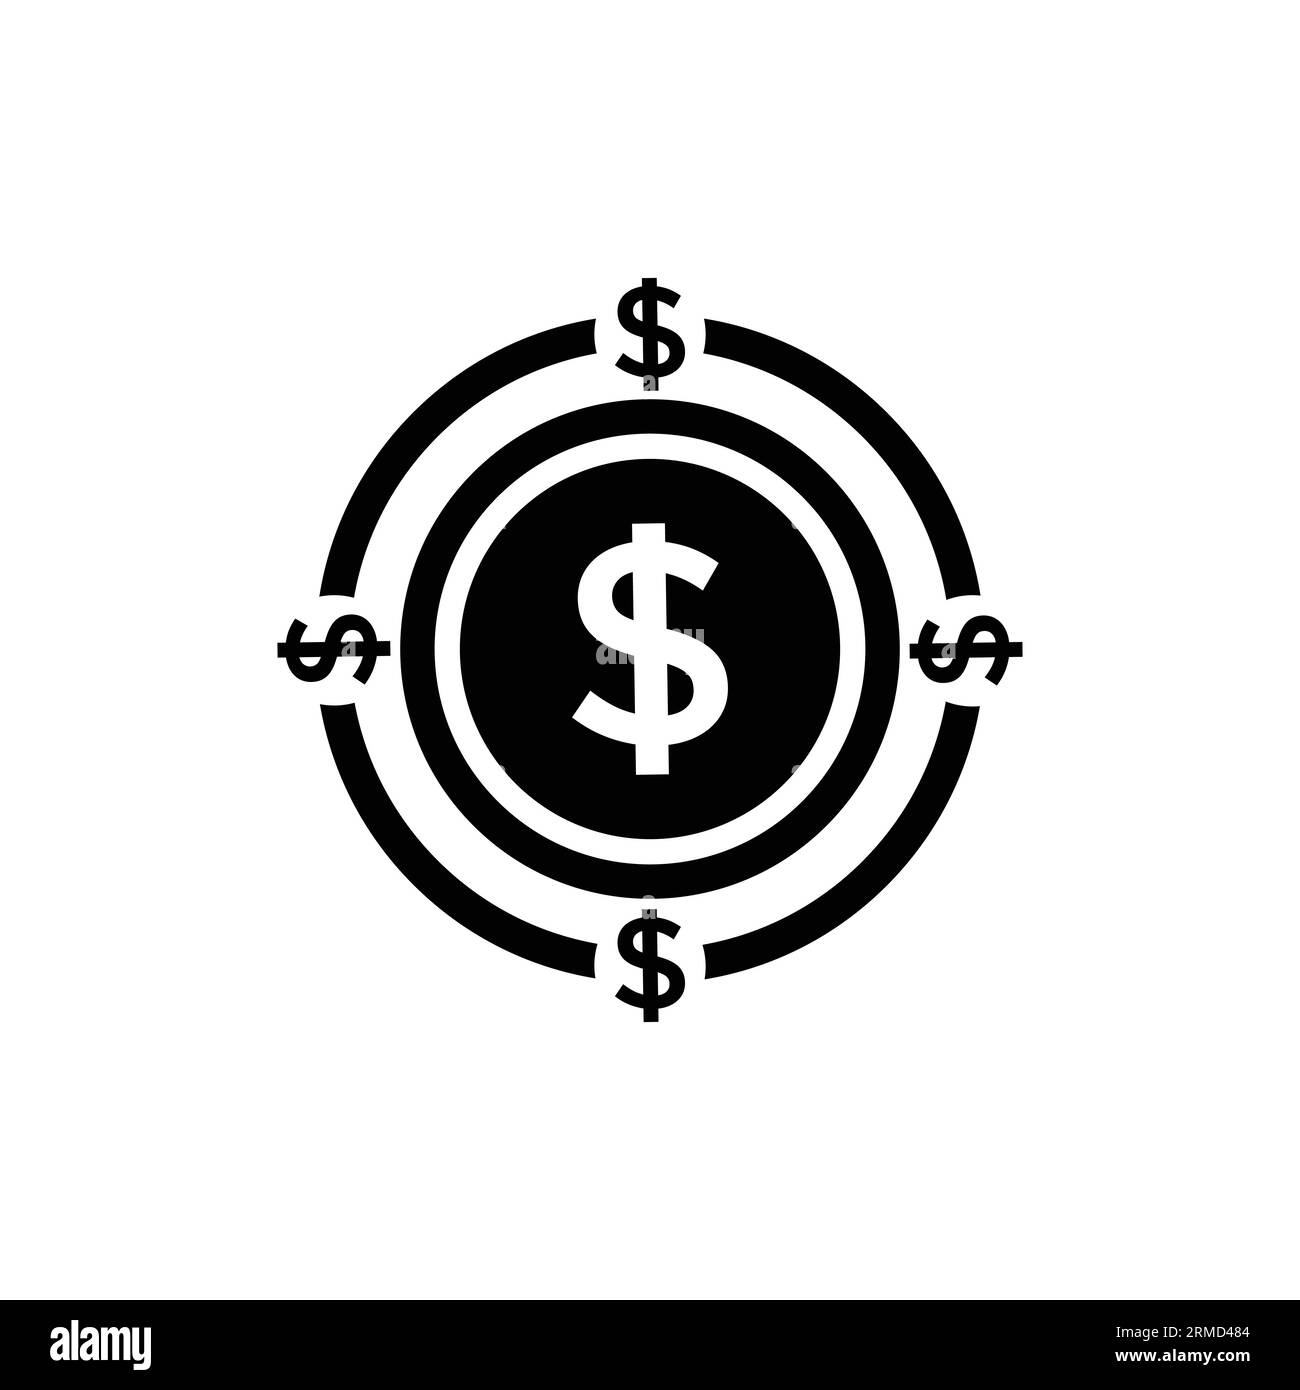 Hedge funds icon line symbol. Isolated illustration of icon sign concept for your web site mobile app logo UI design. Stock Vector